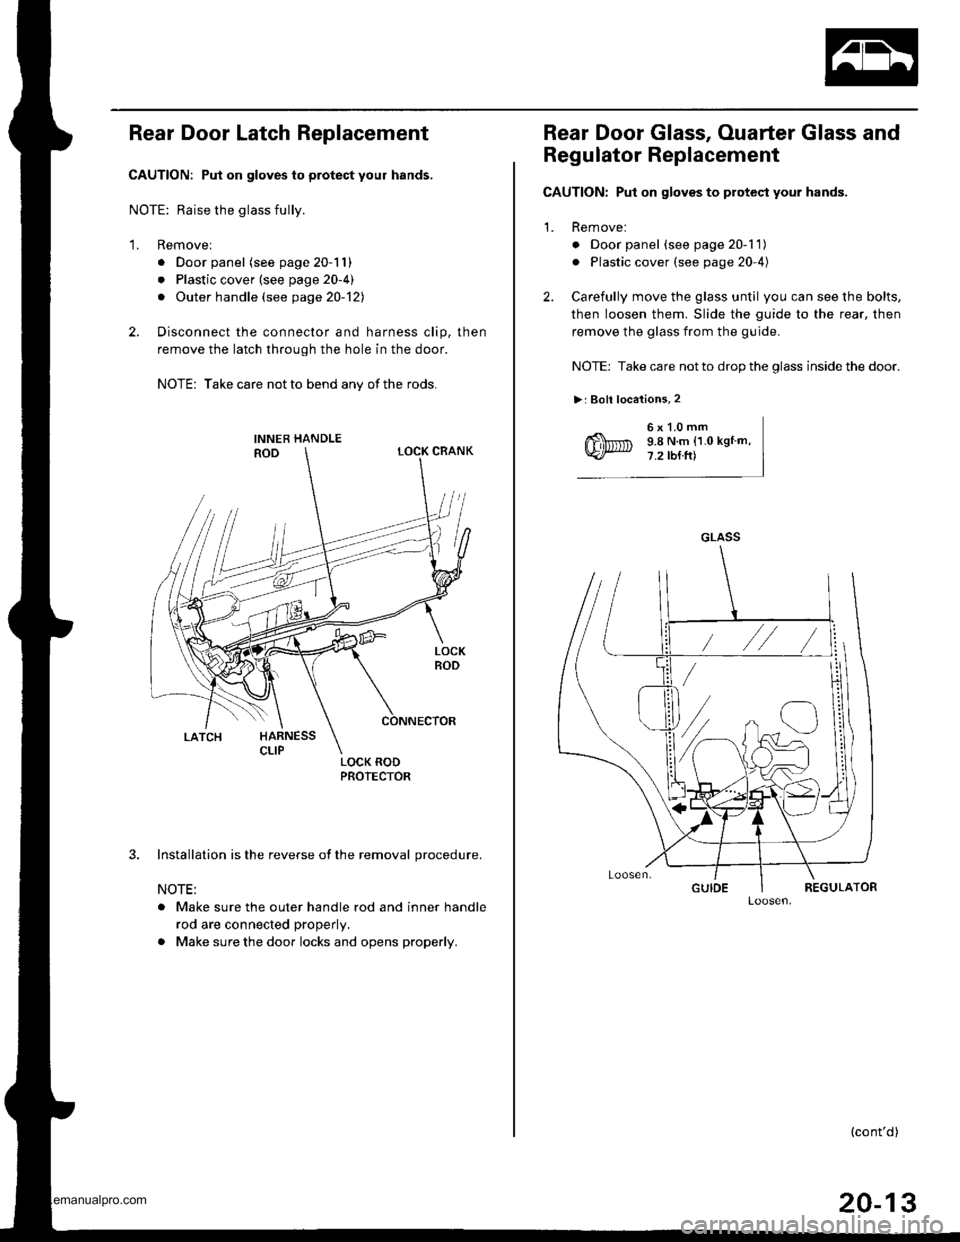 HONDA CR-V 1998 RD1-RD3 / 1.G Workshop Manual 
Rear Door Latch Replacement
CAUTION: Put on gloves to protect your hands,
NOTE: Raise the glass fully.
1. Removel
. Door panel (see page 20-11)
. Plastic cover (see page 20-4)
. Outer handle (see pag